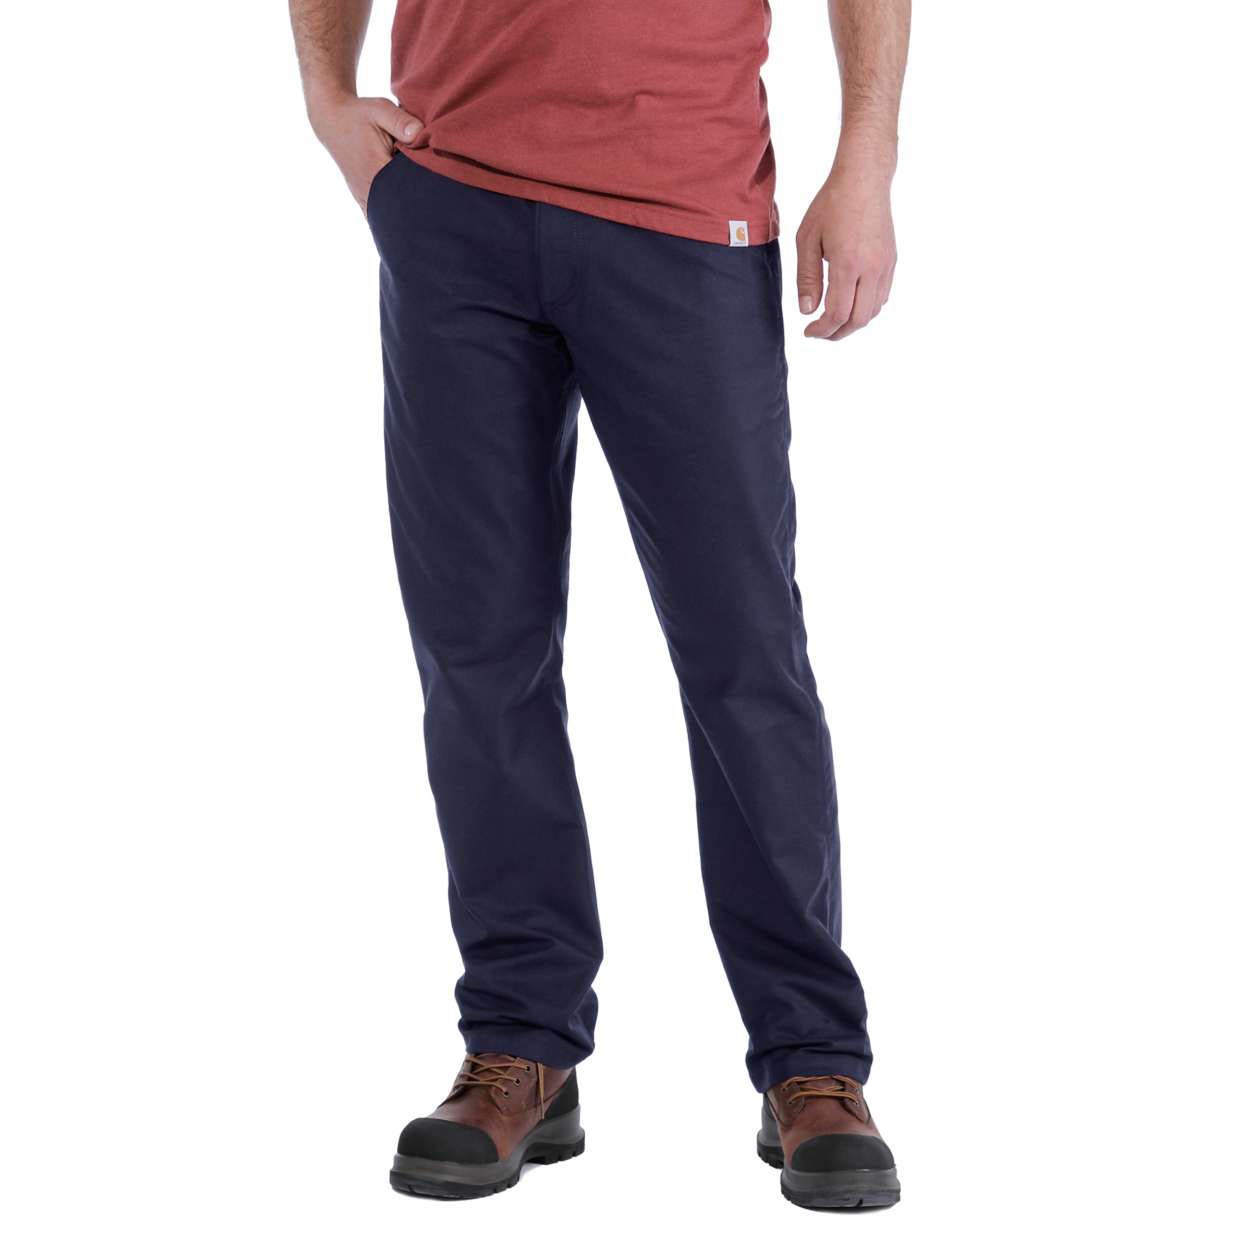 B290 Carhartt Twill Work Pant | Pioneer Outfitters